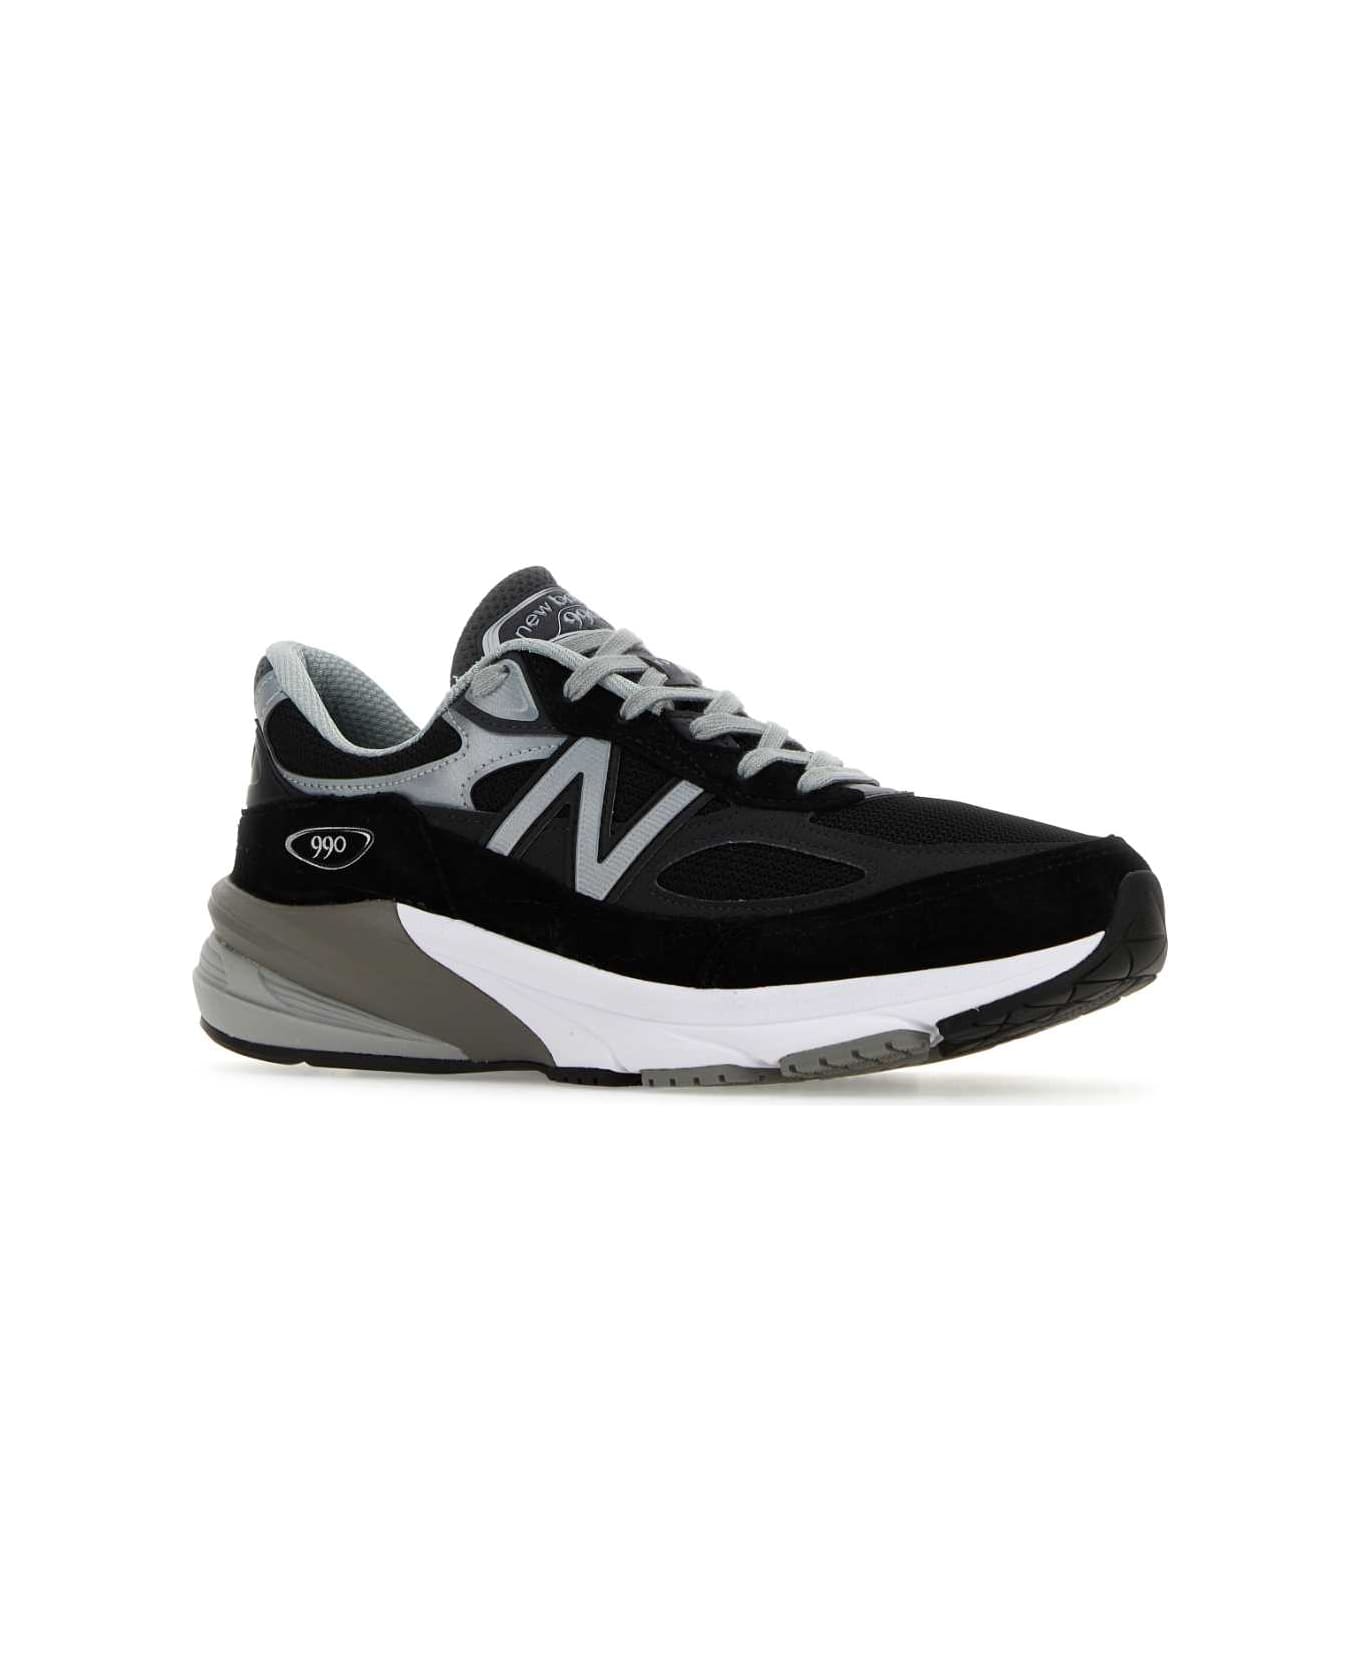 New Balance Multicolor Fabric And Suede 990v6 Sneakers - BLACK